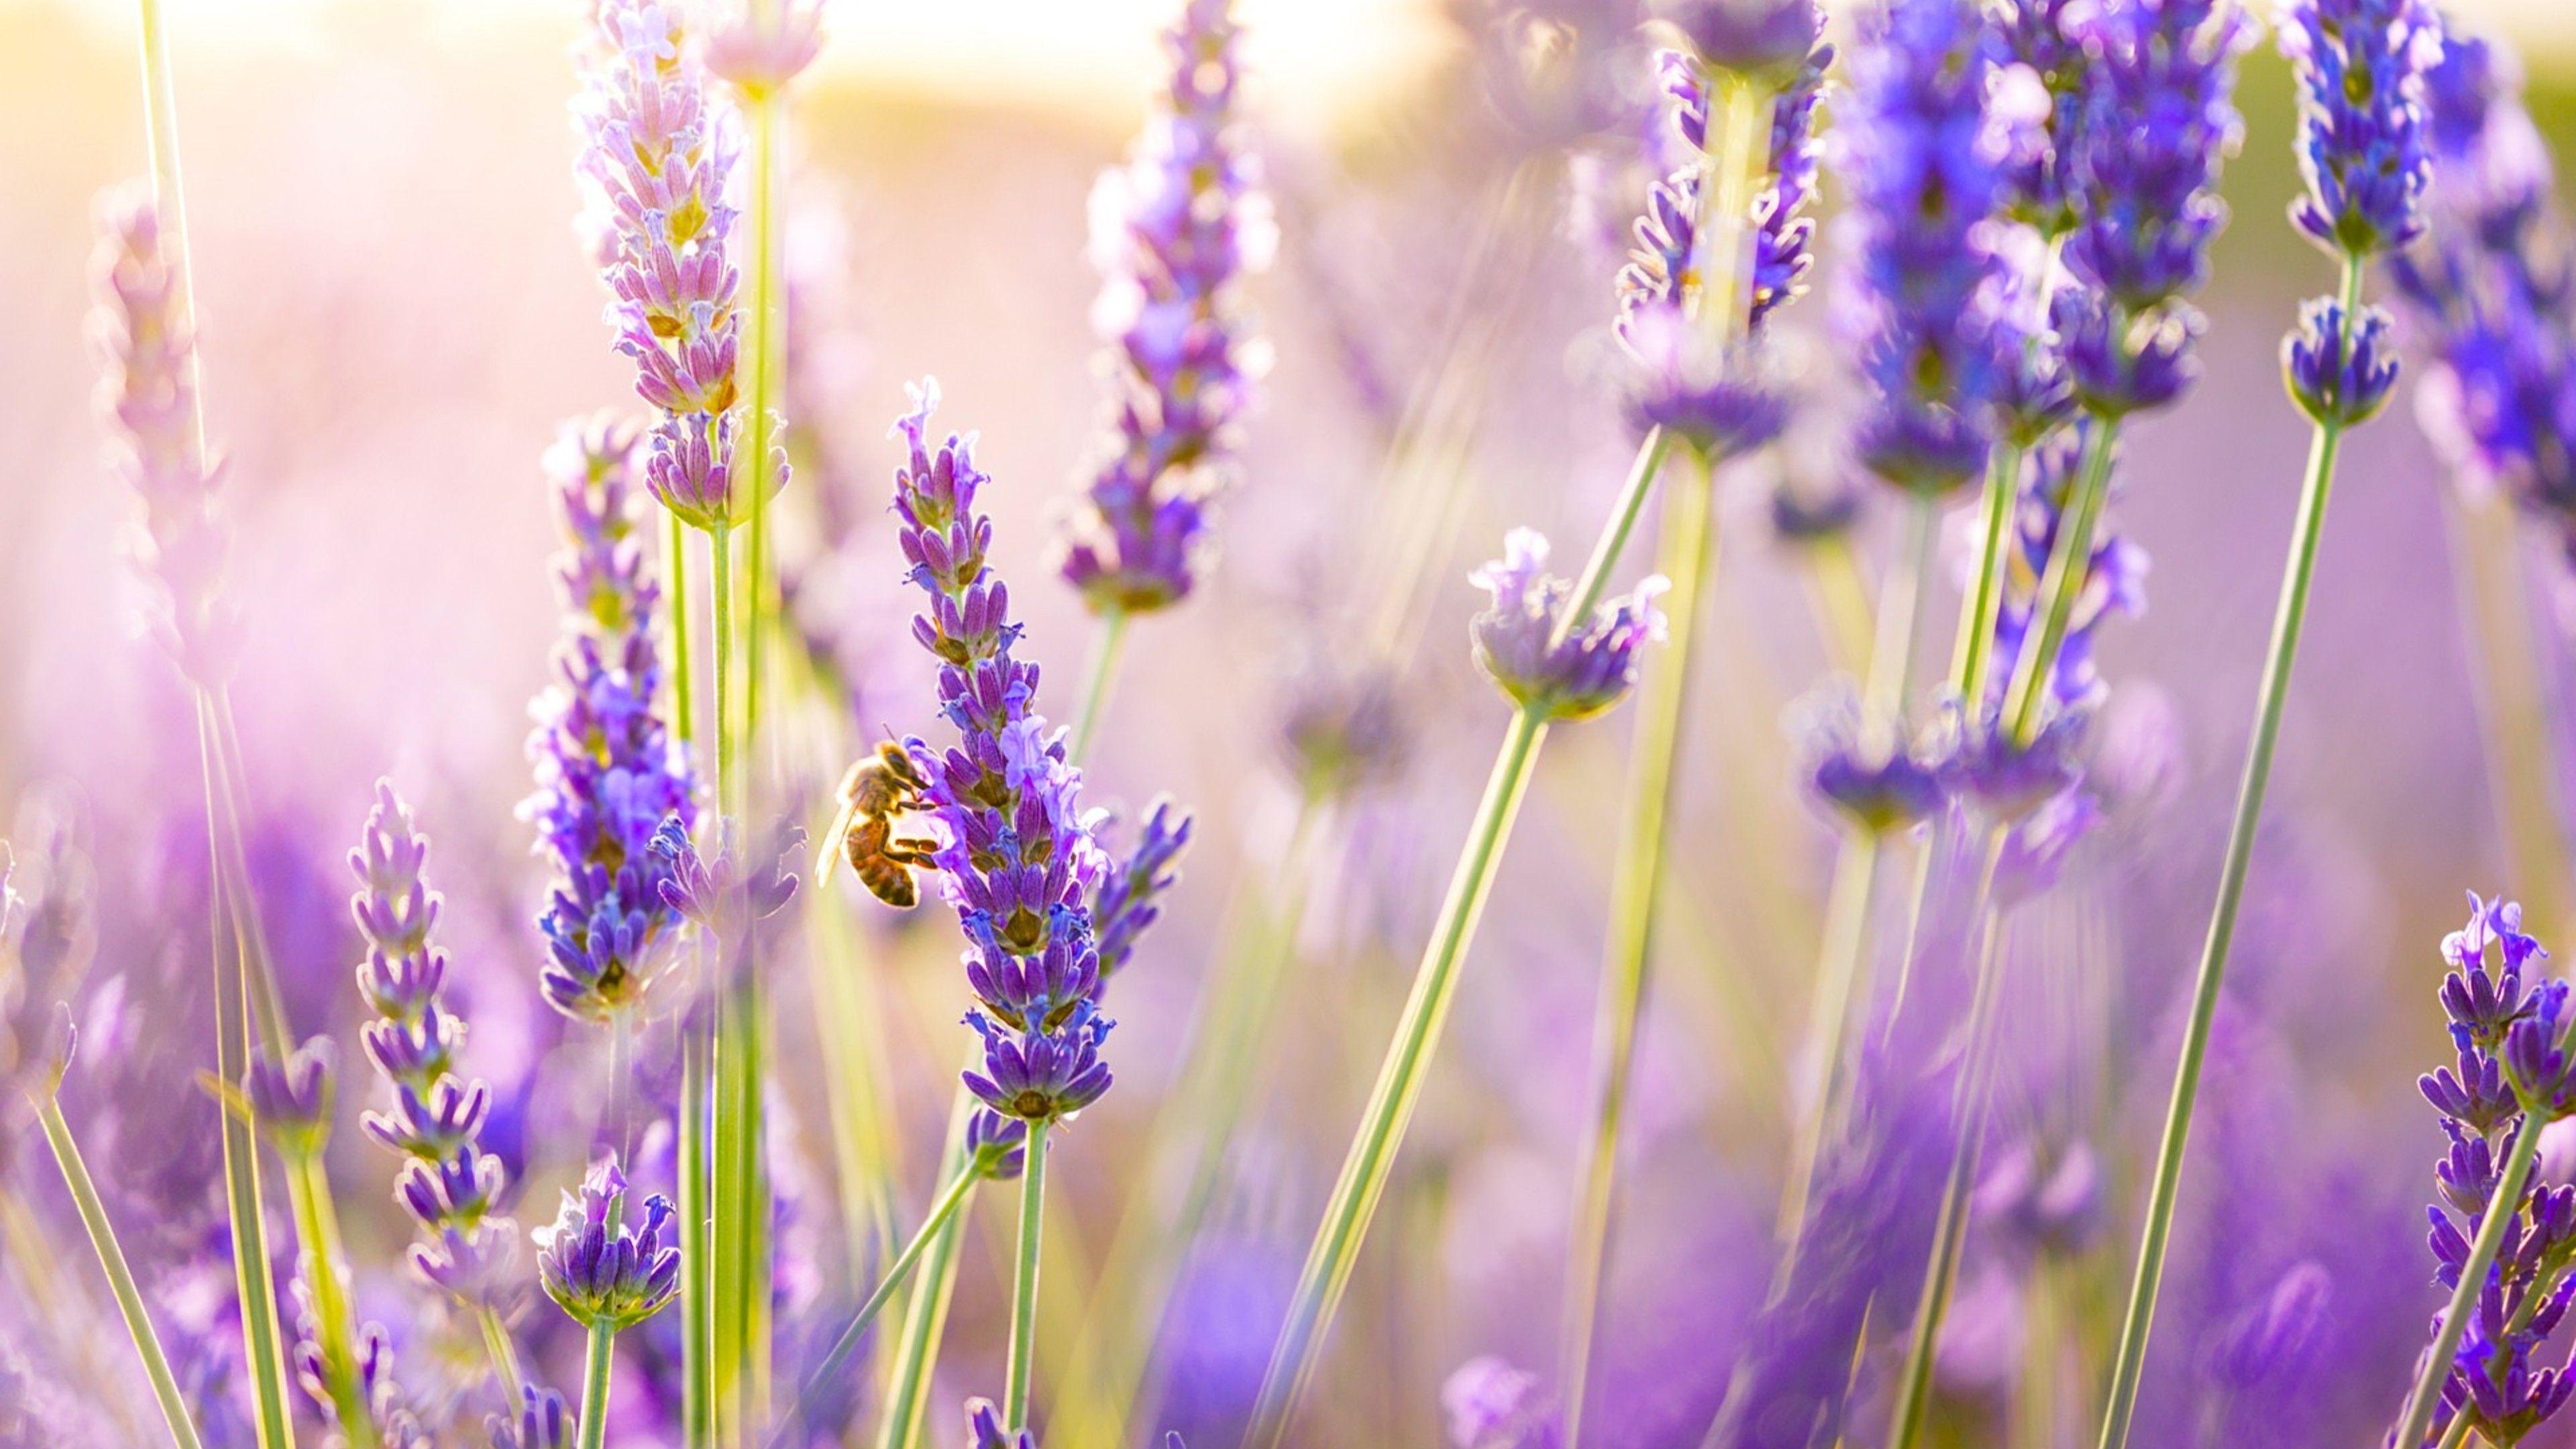 83 Wallpaper For Laptop Lavender For FREE - MyWeb